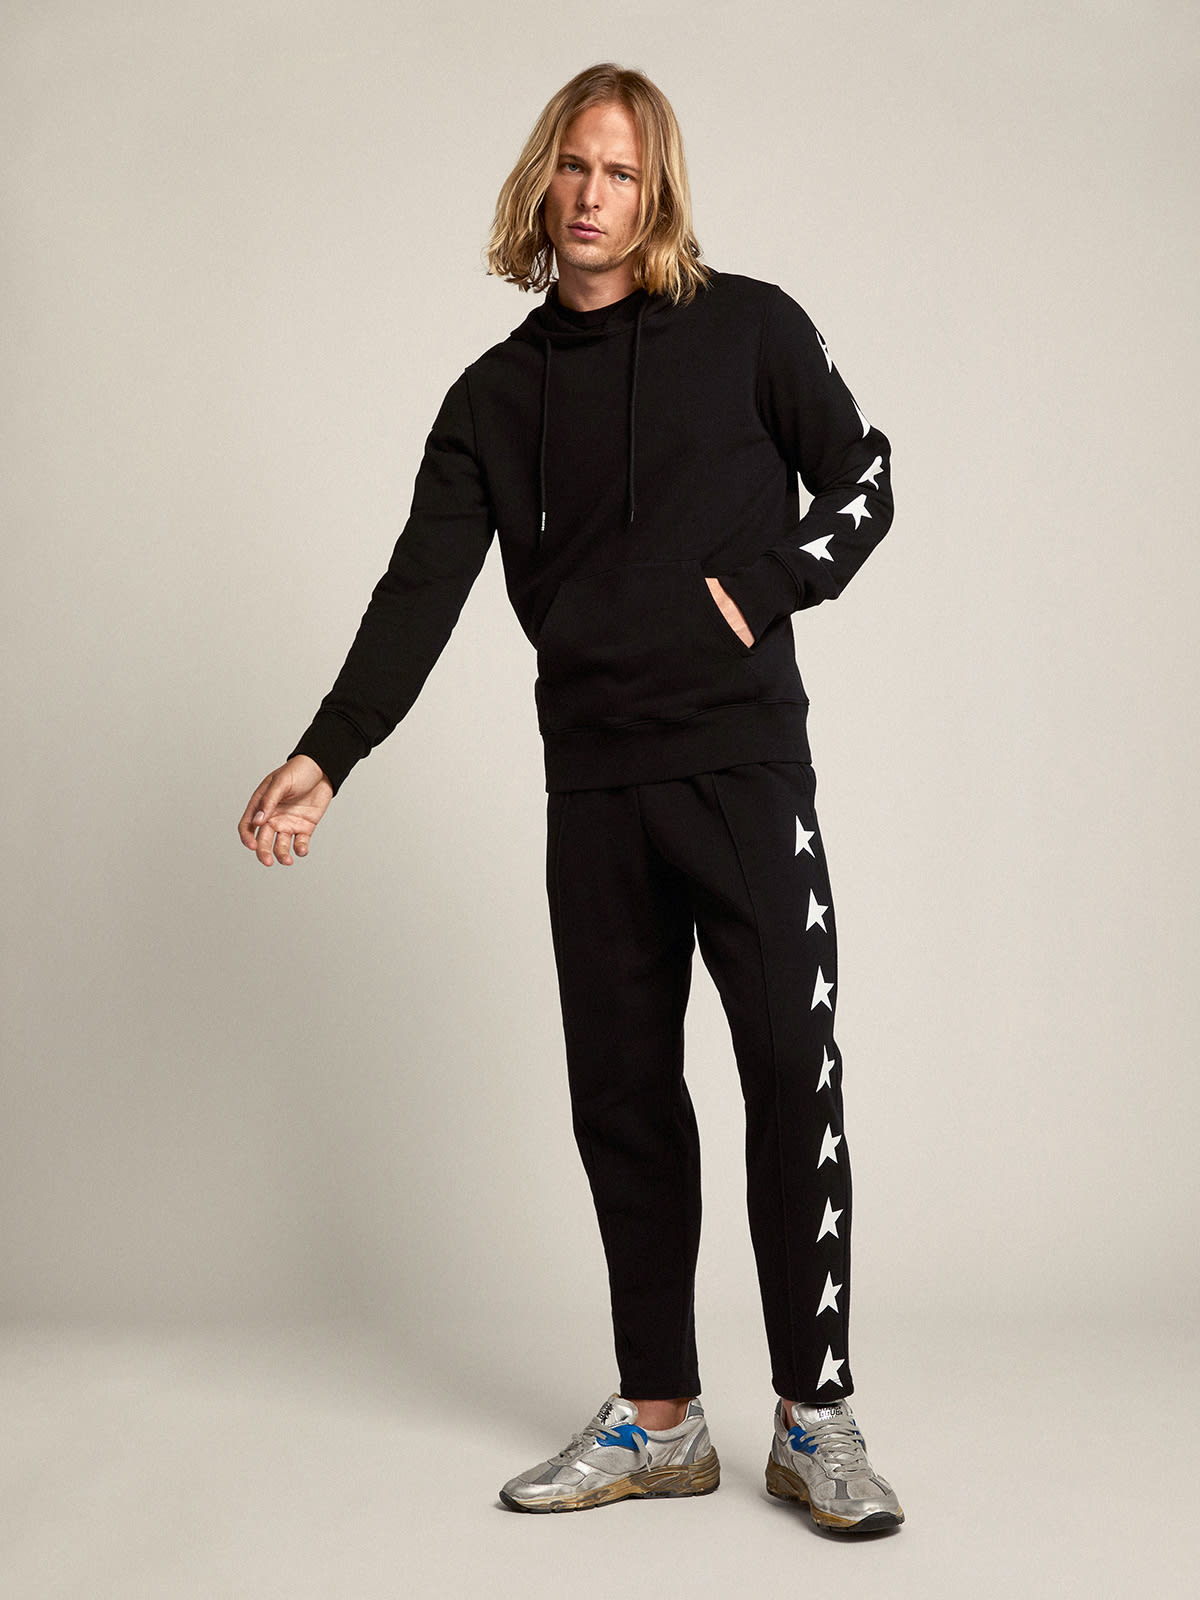 Golden Goose - Black joggers with contrasting white stars in 